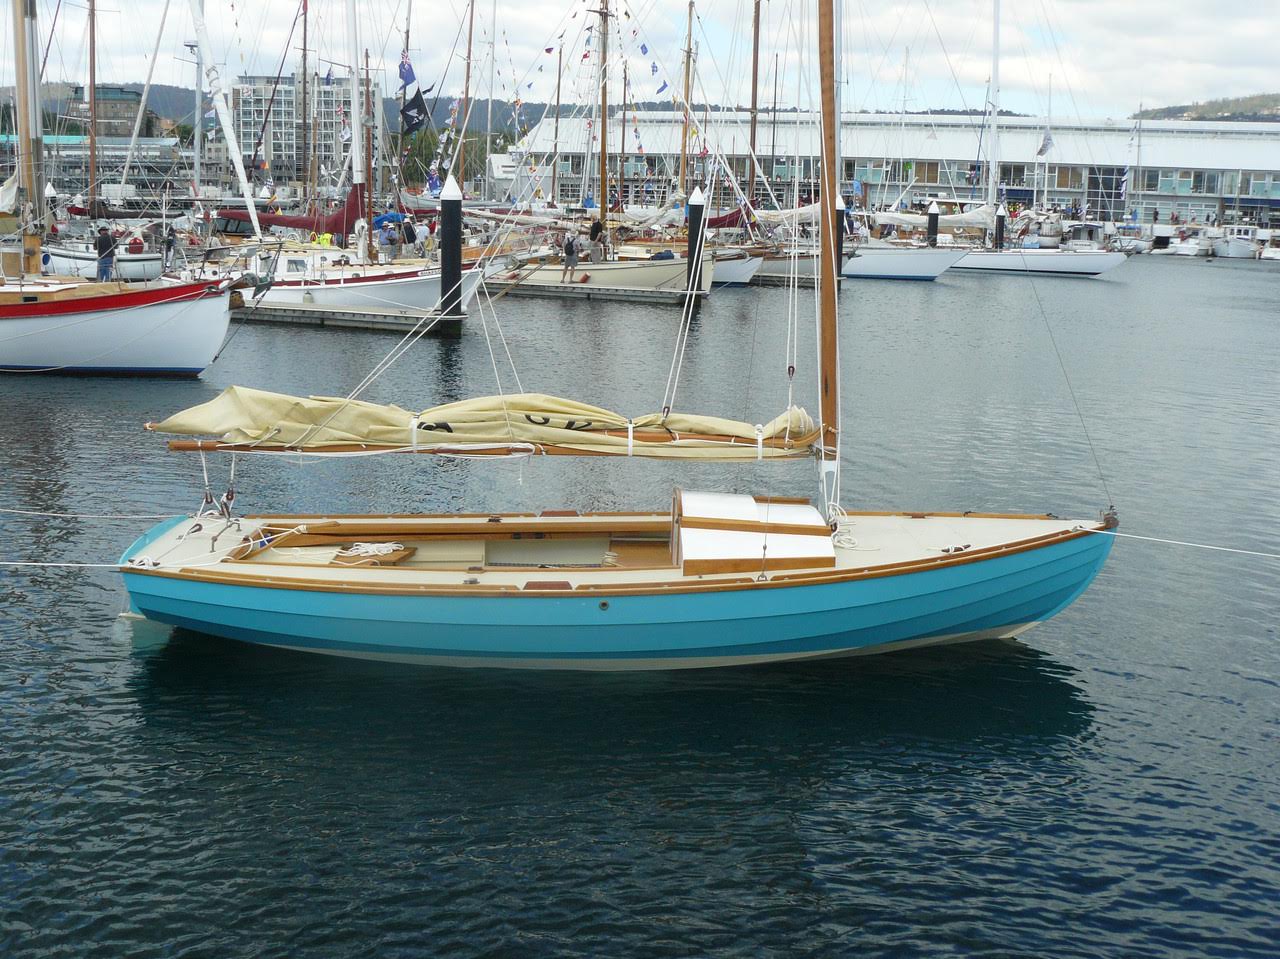 You are currently viewing Stir-Ven “Kelpie” for sale